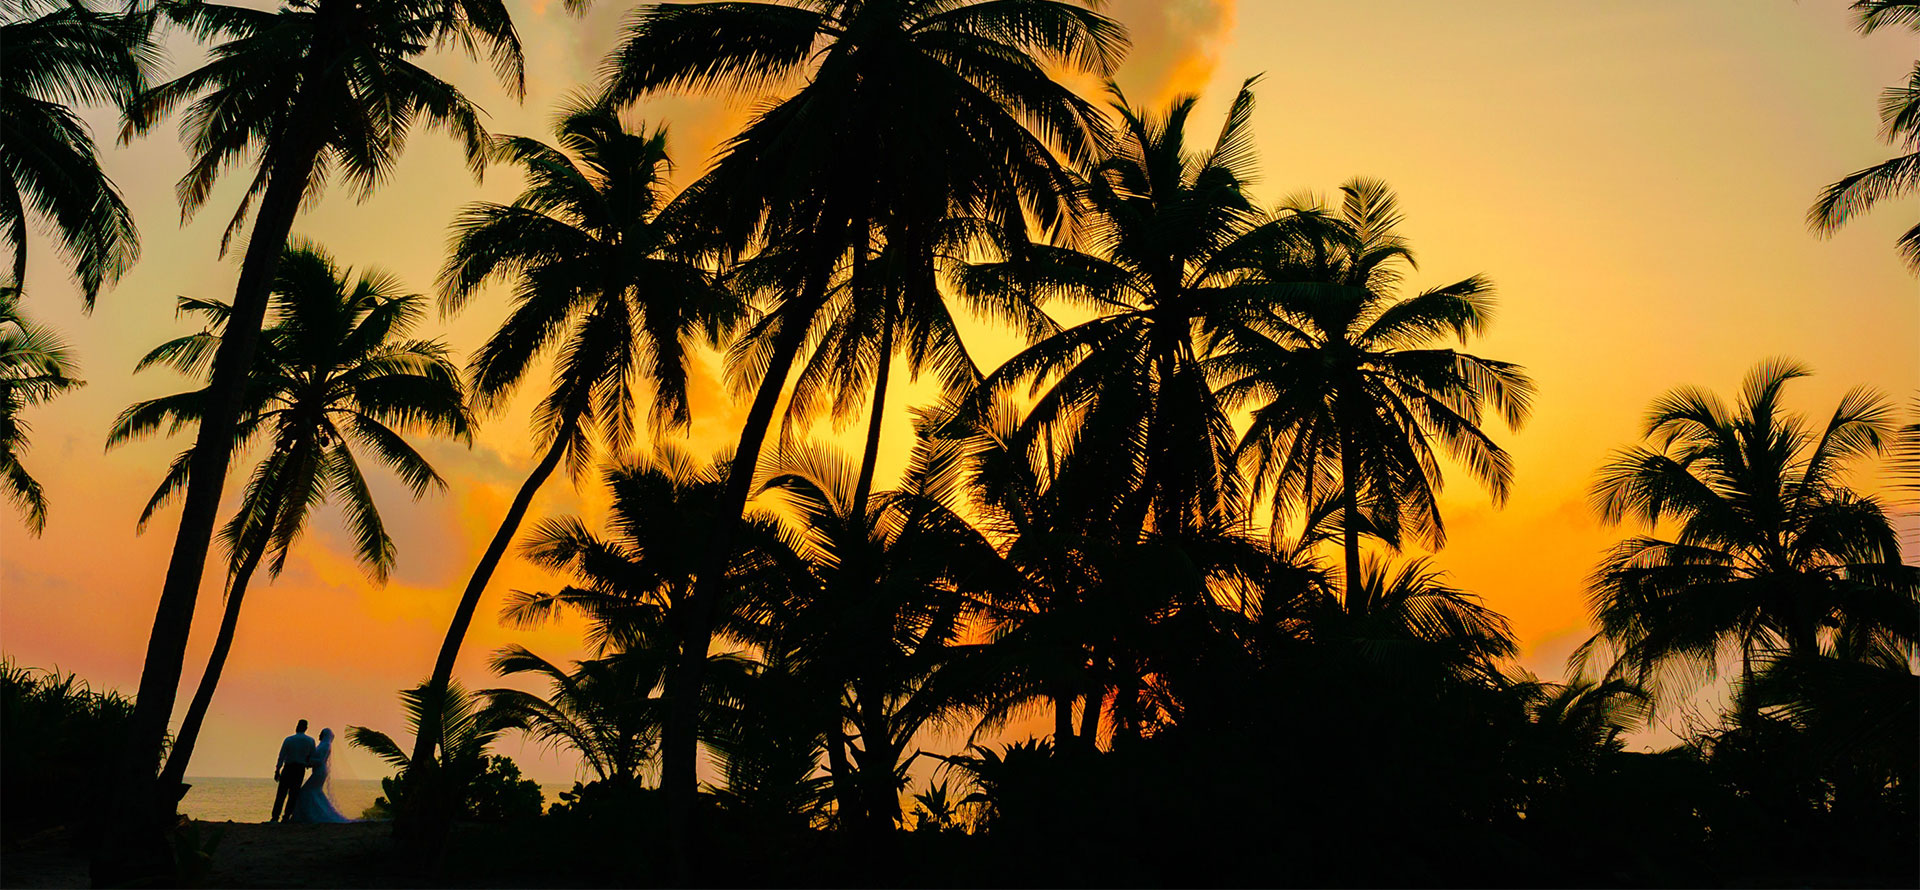 Palms on the beach in St Barts.